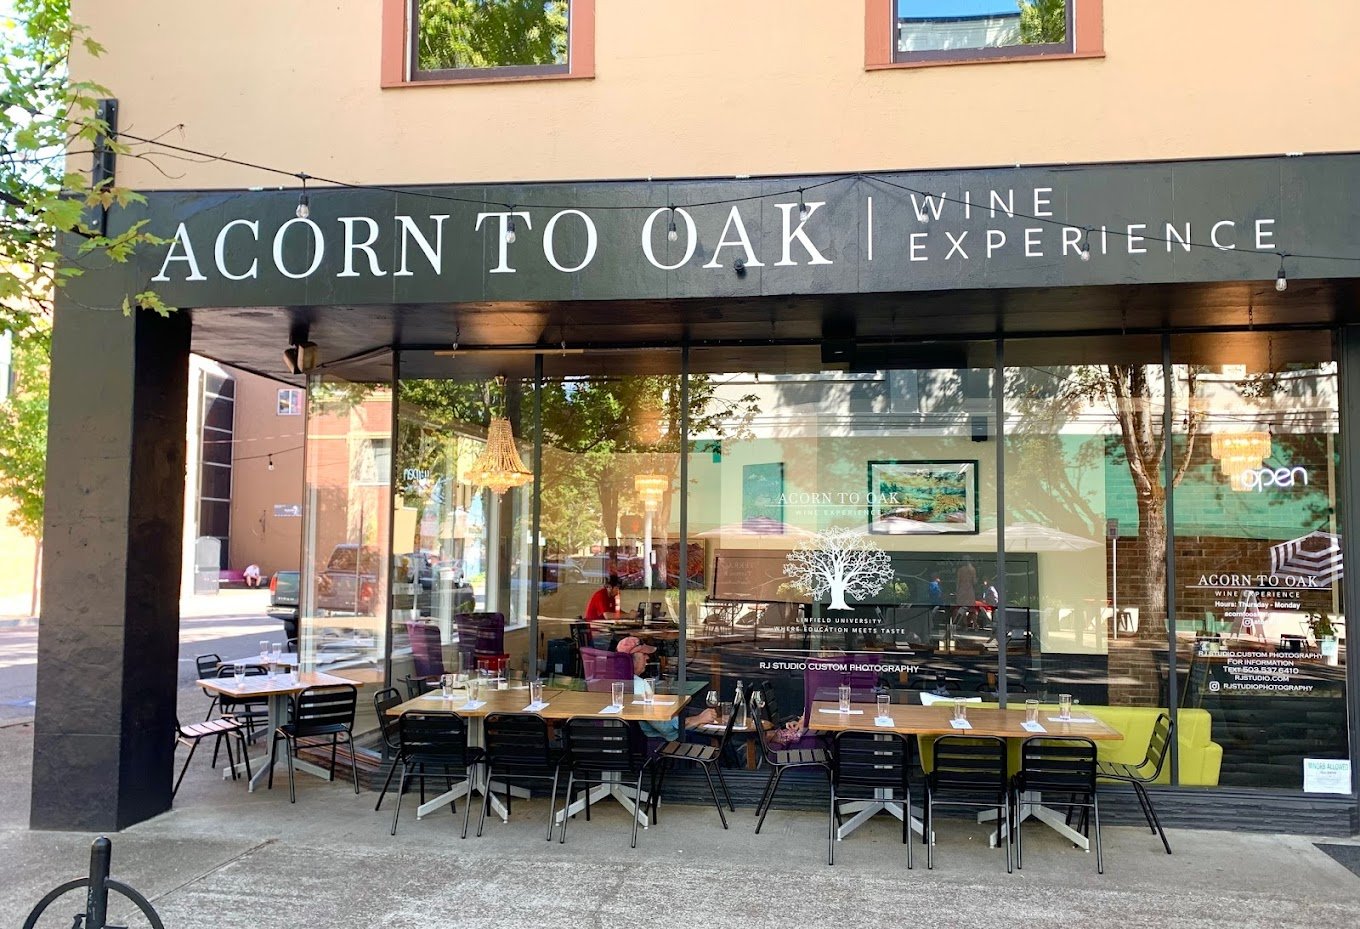 Exterior of the Acorn to Oak Wine Experience Tasting Room in McMinnville, Oregon